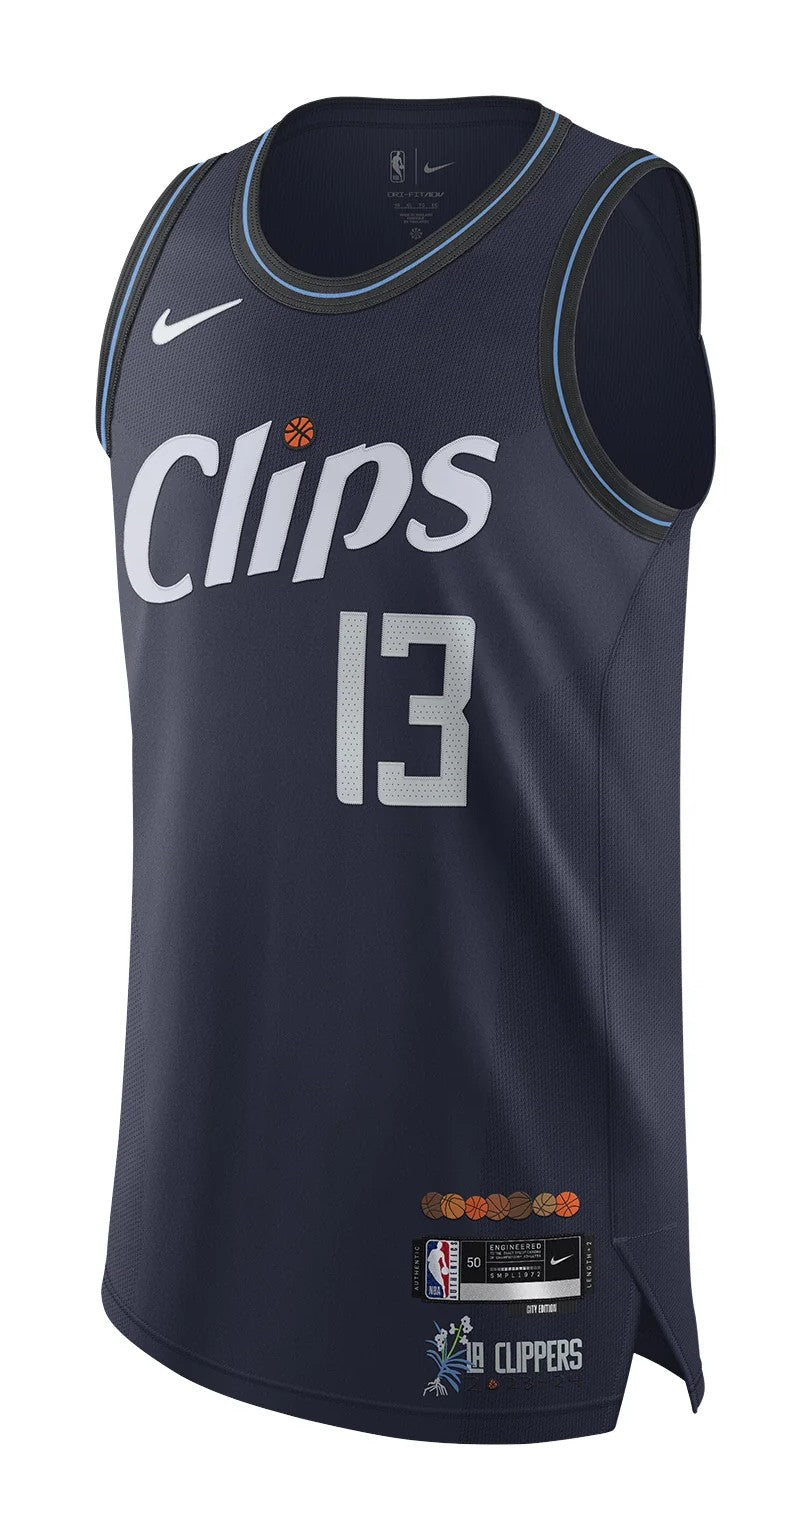 LOS ANGELES CLIPPERS CITY JERSEY 23/24